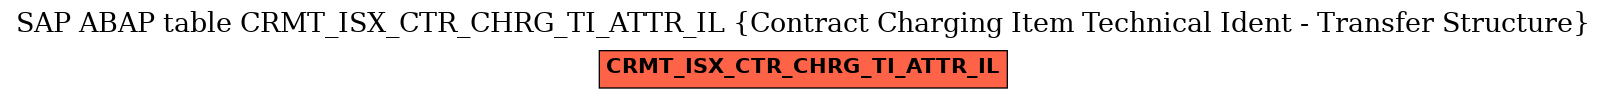 E-R Diagram for table CRMT_ISX_CTR_CHRG_TI_ATTR_IL (Contract Charging Item Technical Ident - Transfer Structure)